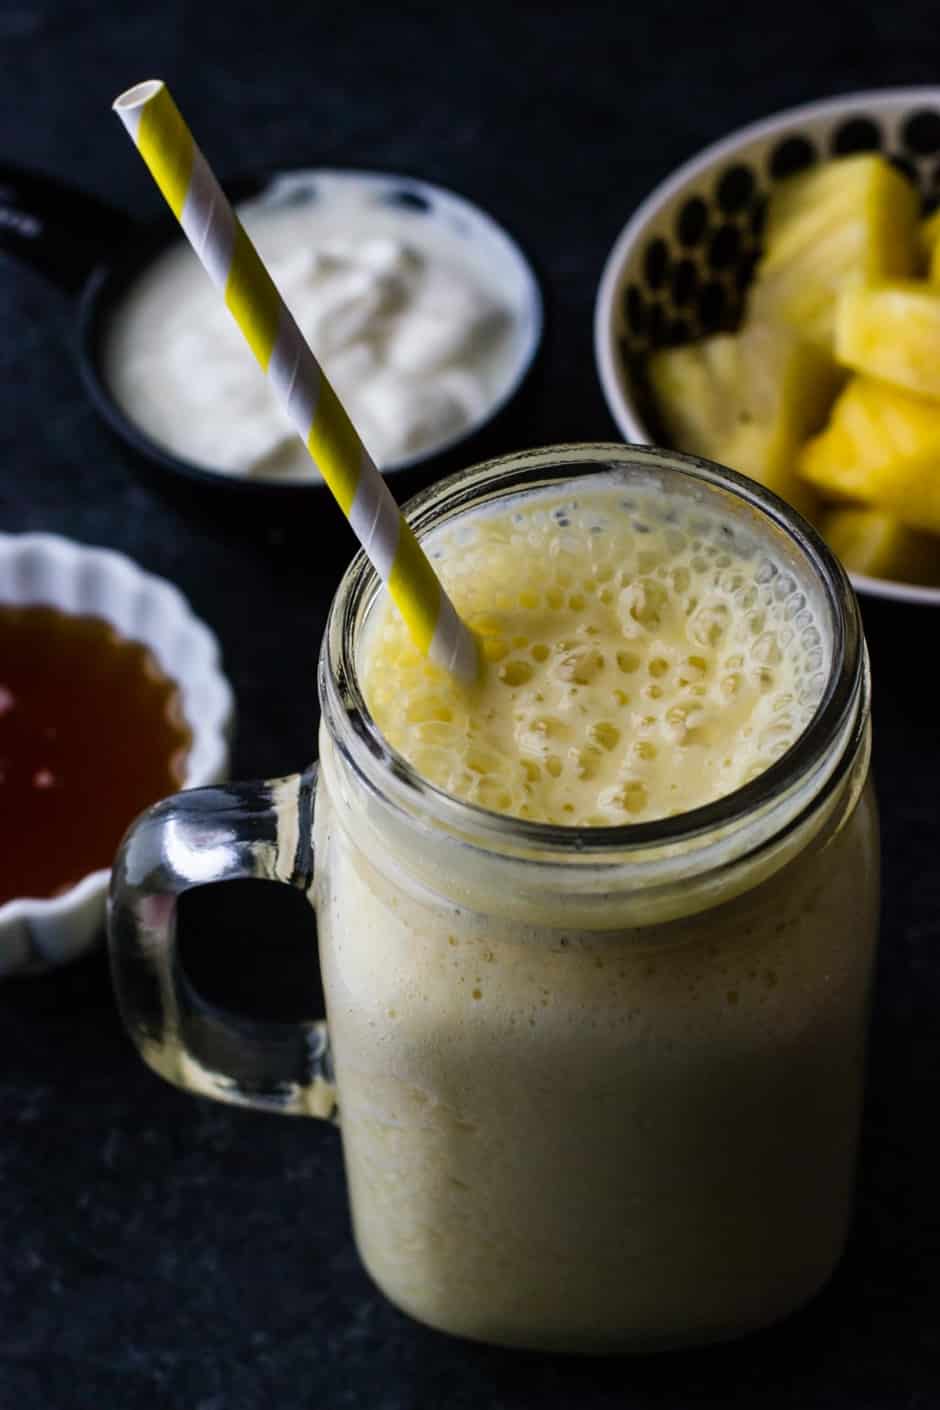 Pineapple orange smoothie served in a ball jar